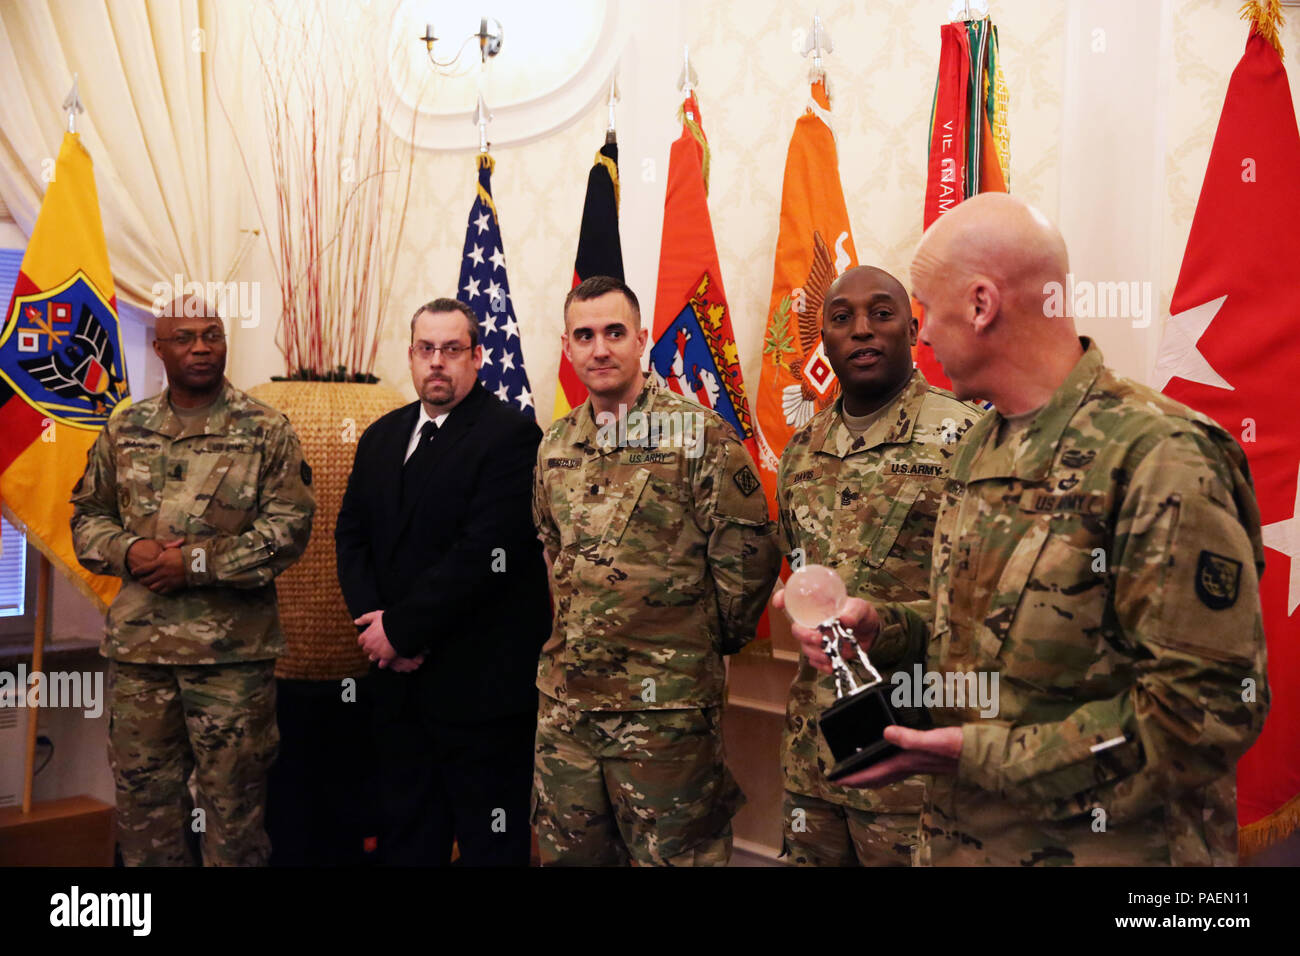 Maj. Gen. John B. Morrison Jr. (far right), commander of U.S. Army Network Technology Command, and Command Sgt. Maj. Stephfon Watson (far left), NETCOM senior enlisted advisor, present the award for 2015 NETCOM NEC of the Year to leaders from the 102nd Signal Battalion, 2nd Signal Brigade at an Orange Call event March 21, 2016 at the Community Activity Center on Clay Kaserne in Wiesbaden, Germany. From center left to center right: James Ellersick, 102nd Signal Battalion regional director; Lt. Col. Chris Keeshan, 102nd Signal Battalion commander; Command Sgt. Maj. Anthony Davis, 102nd Signal Ba Stock Photo